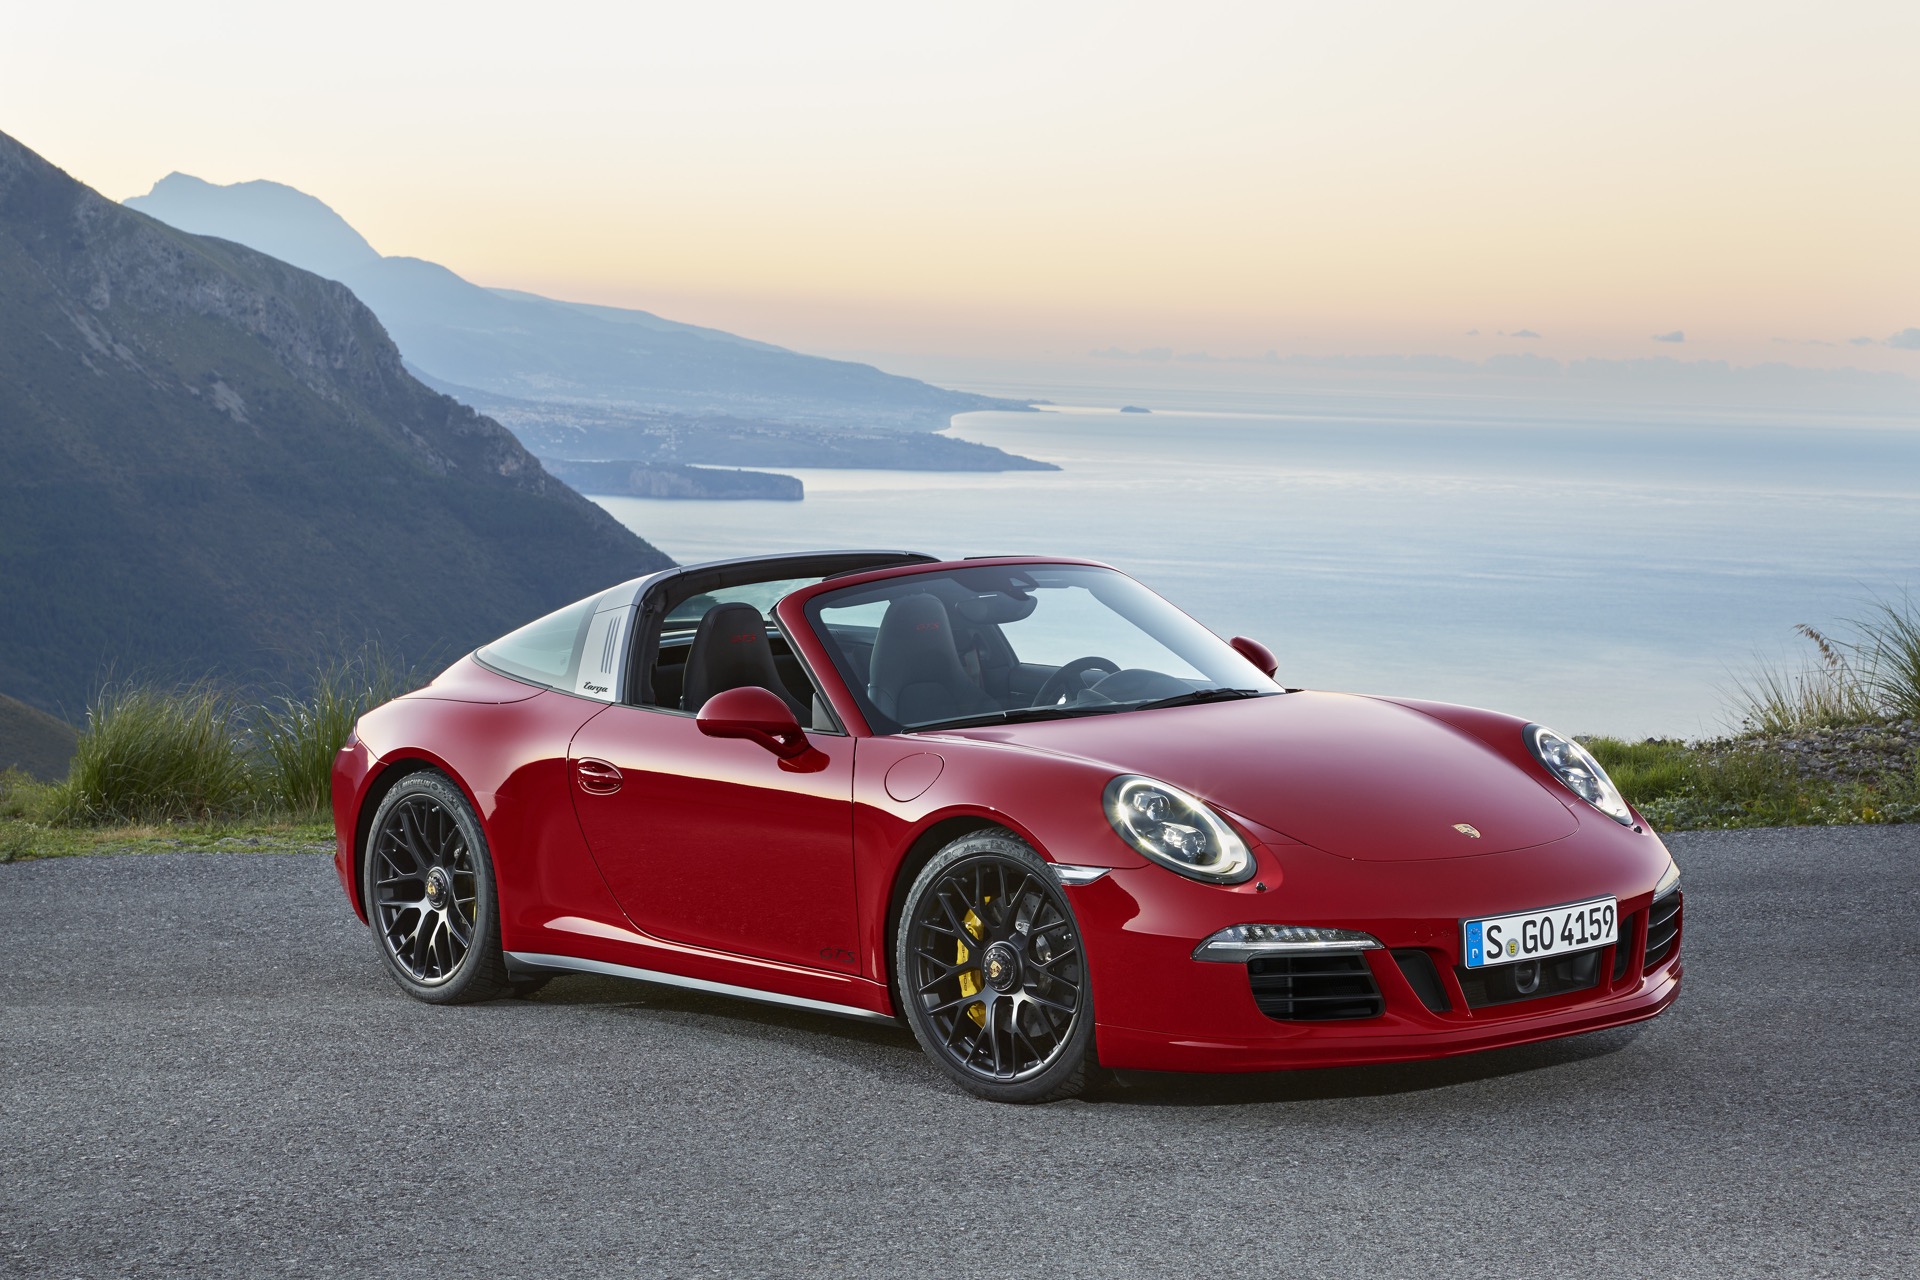 2016 Porsche 911 Safety Review and Crash Test Ratings 